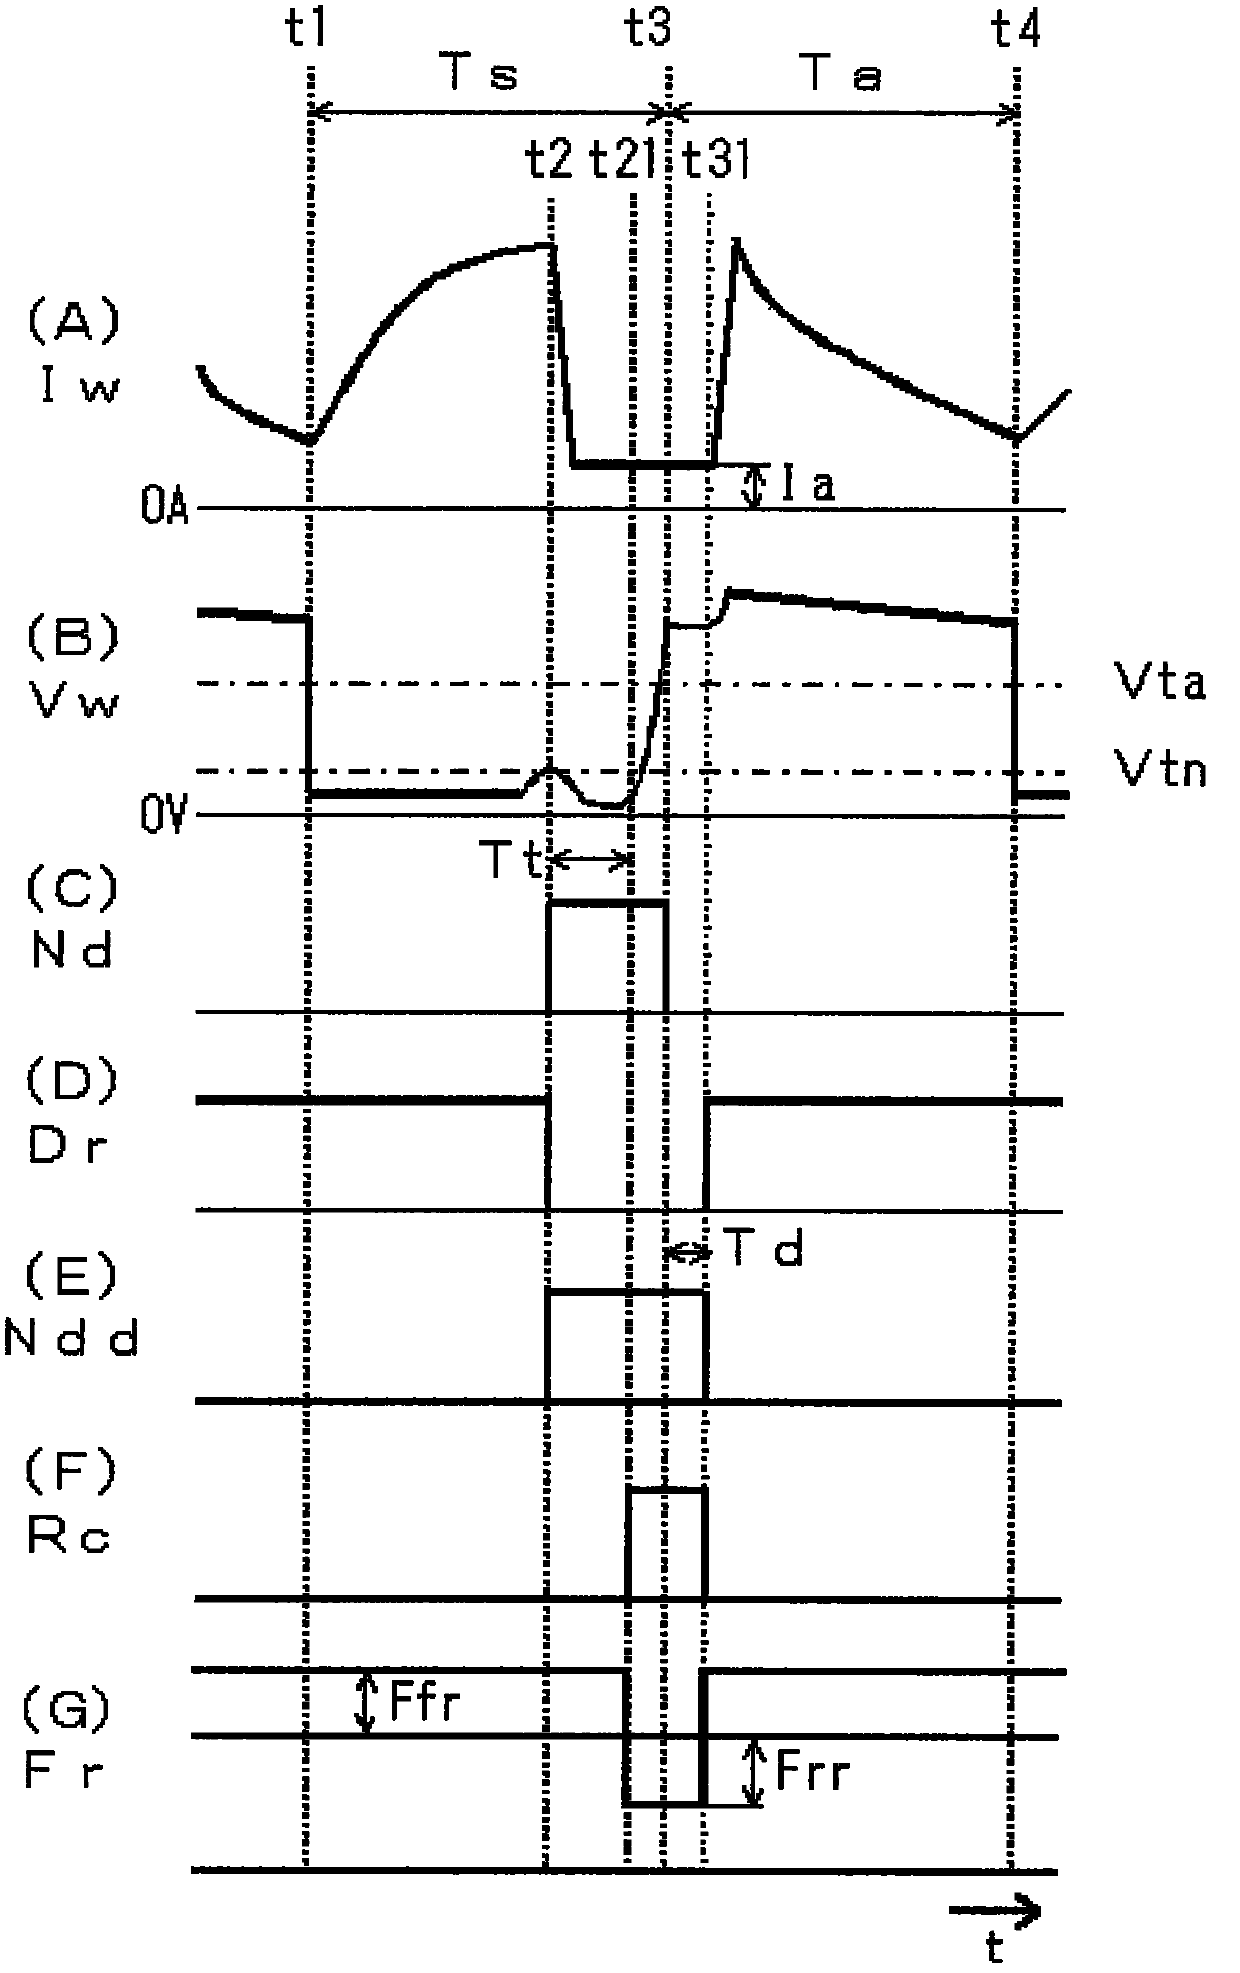 Necking detecting and controlling method for melted-electrode arc welding